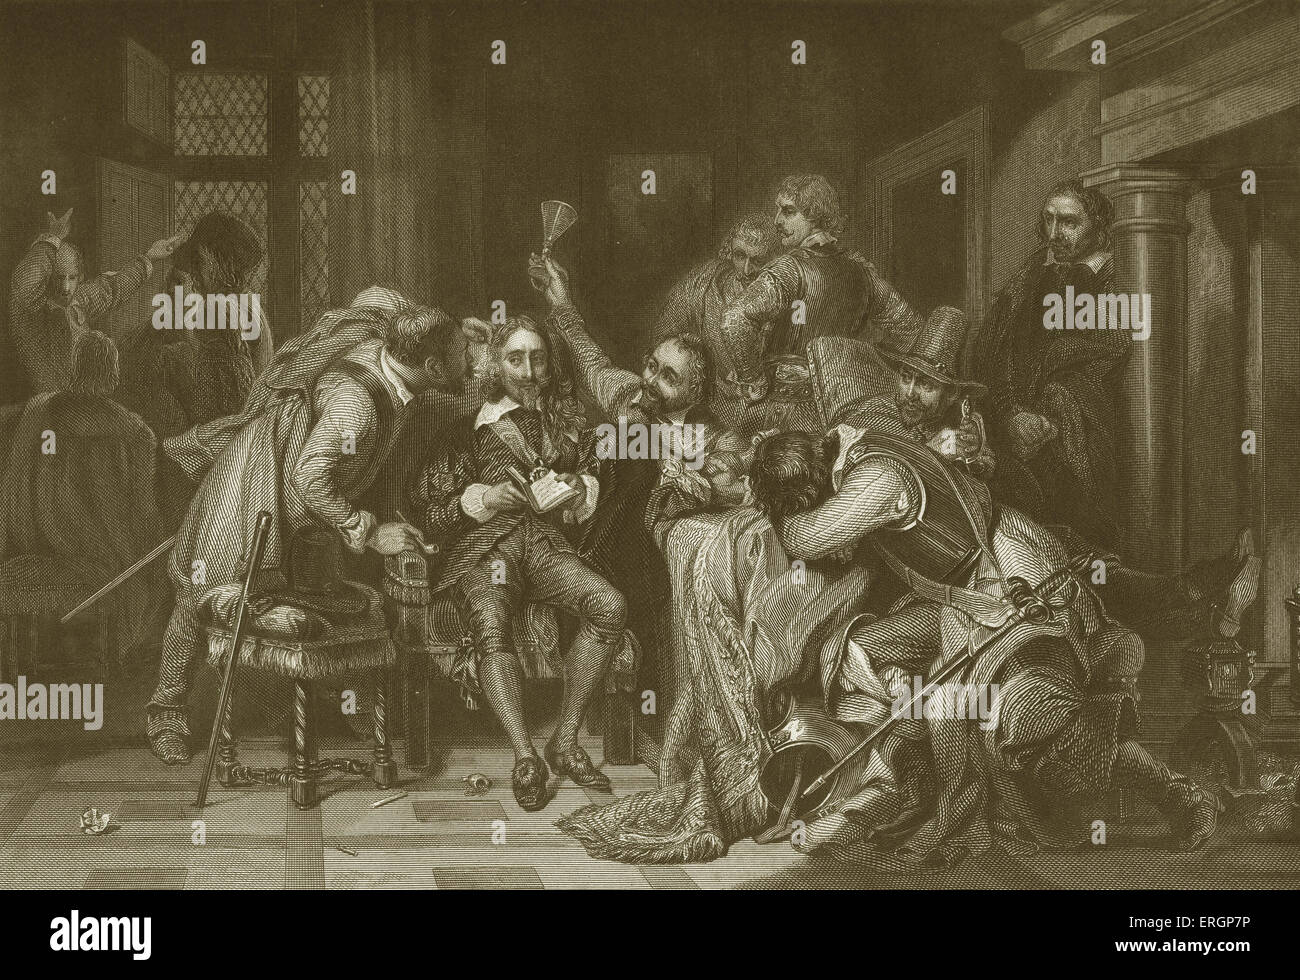 Charles I Insulted by Cromwell's Soldiers, after the painting by Paul Delaroche. Charles I (1600-1649) King of England, Scotland and Ireland from 27 March 1625 until his execution in 1649. PD: French painter, 17 July 1797 – 4 November 1856. Stock Photo